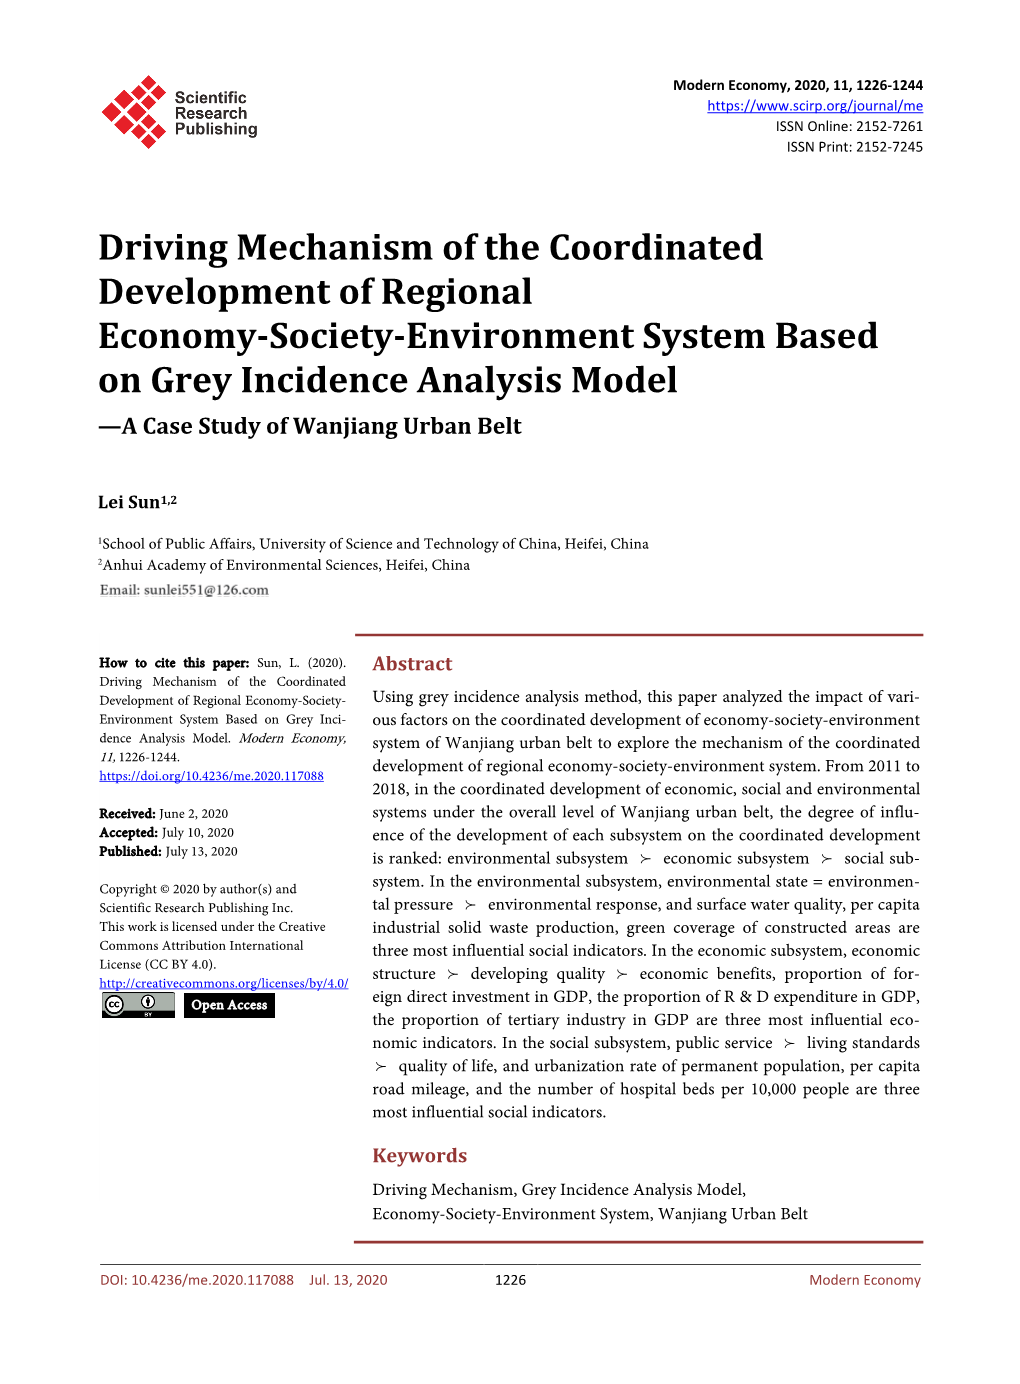 Driving Mechanism of the Coordinated Development of Regional Economy-Society-Environment System Based on Grey Incidence Analysis